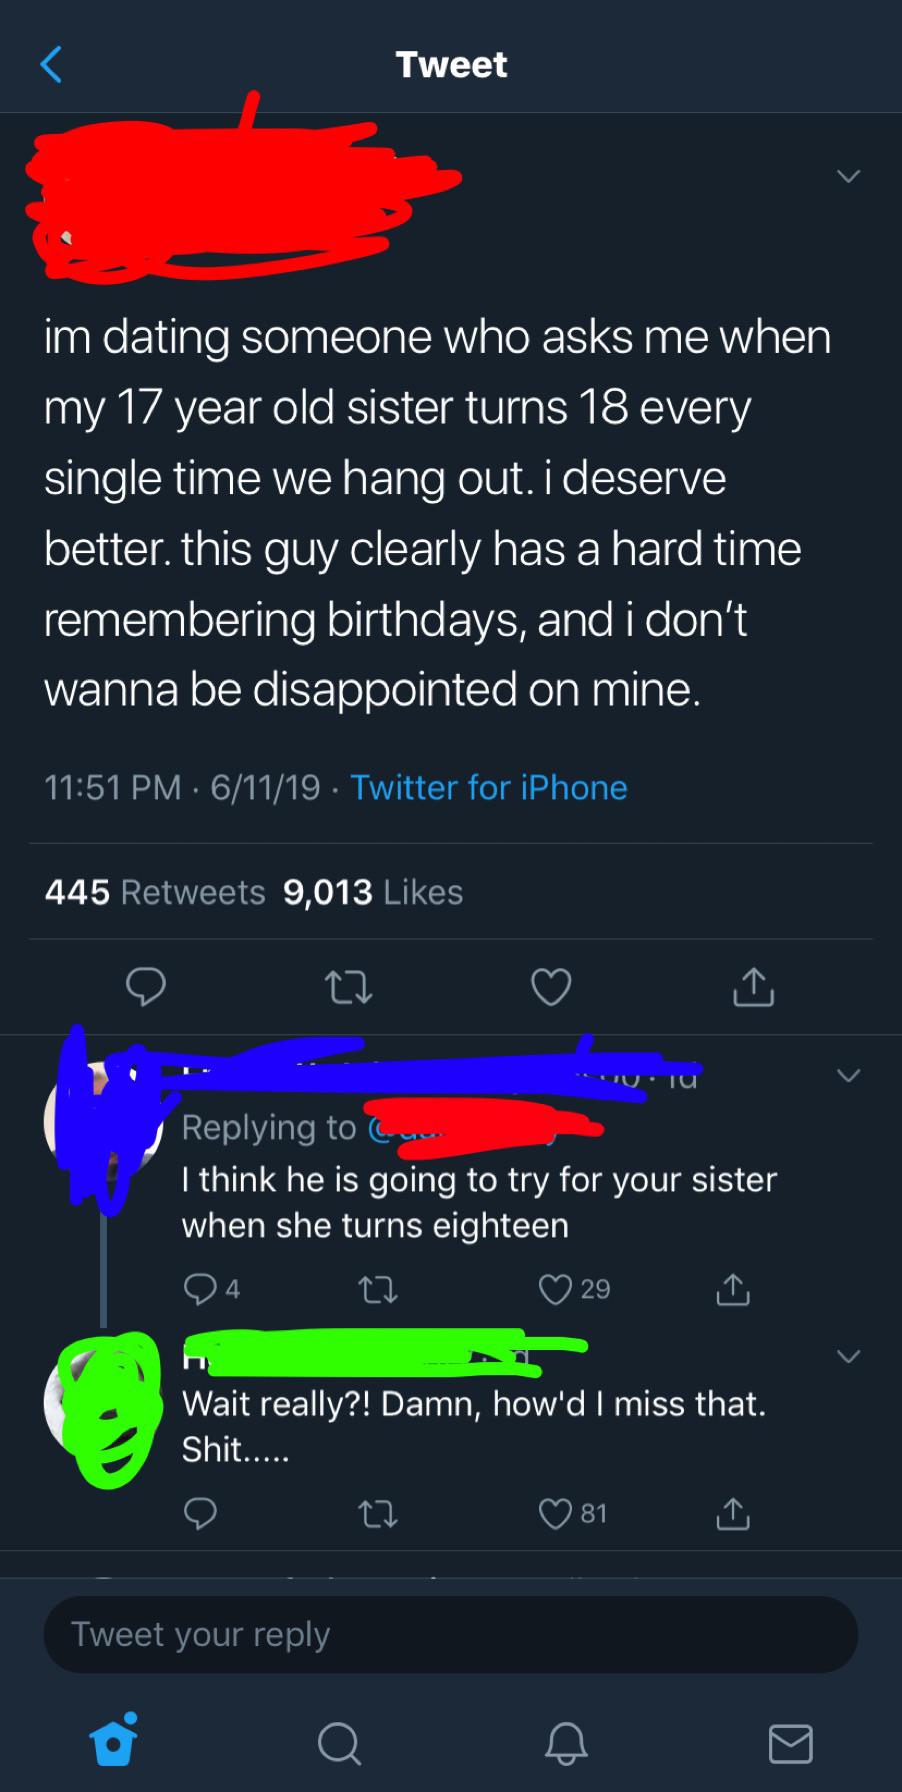 missed - screenshot - Tweet im dating someone who asks me when my 17 year old sister turns 18 every single time we hang out. i deserve better. this guy clearly has a hard time remembering birthdays, and i don't wanna be disappointed on mine. 61119 Twitter